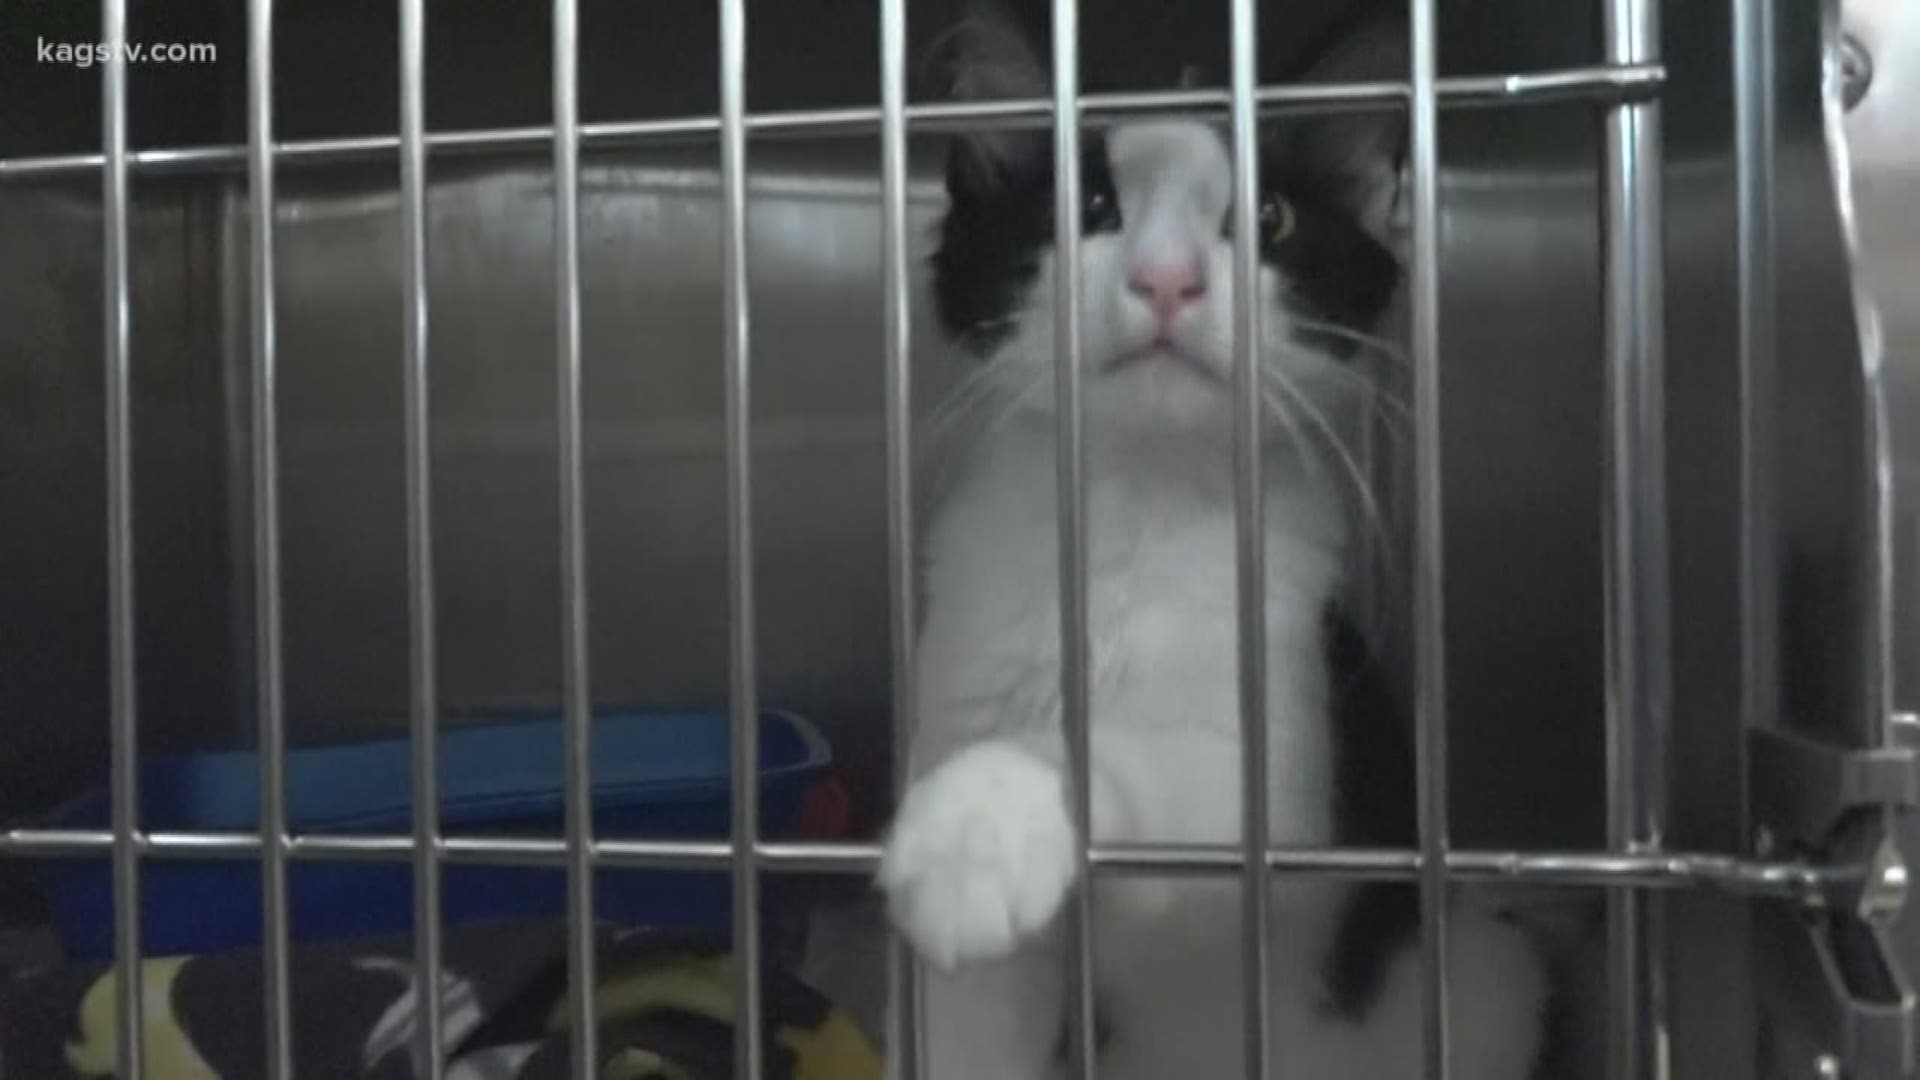 Penguin is available for adoption at the Aggieland Humane Society.